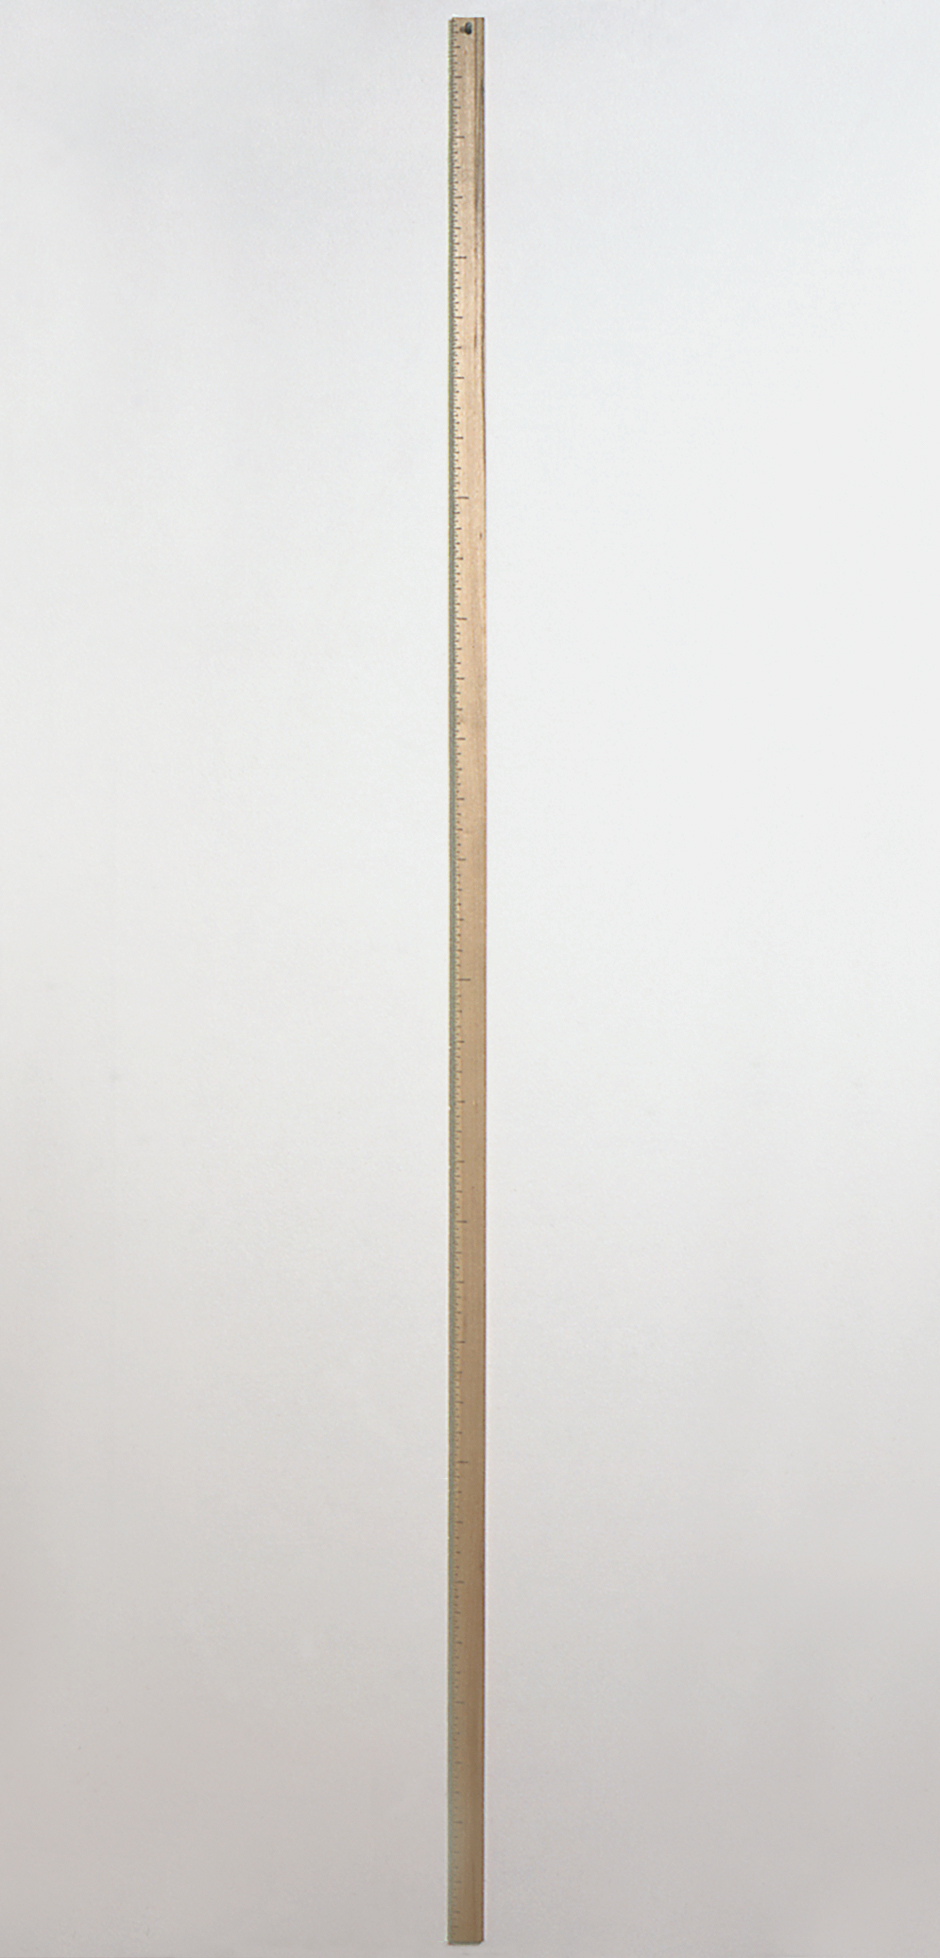 Image of wall hung "Measure IV" sculpture created from bandsawn wood